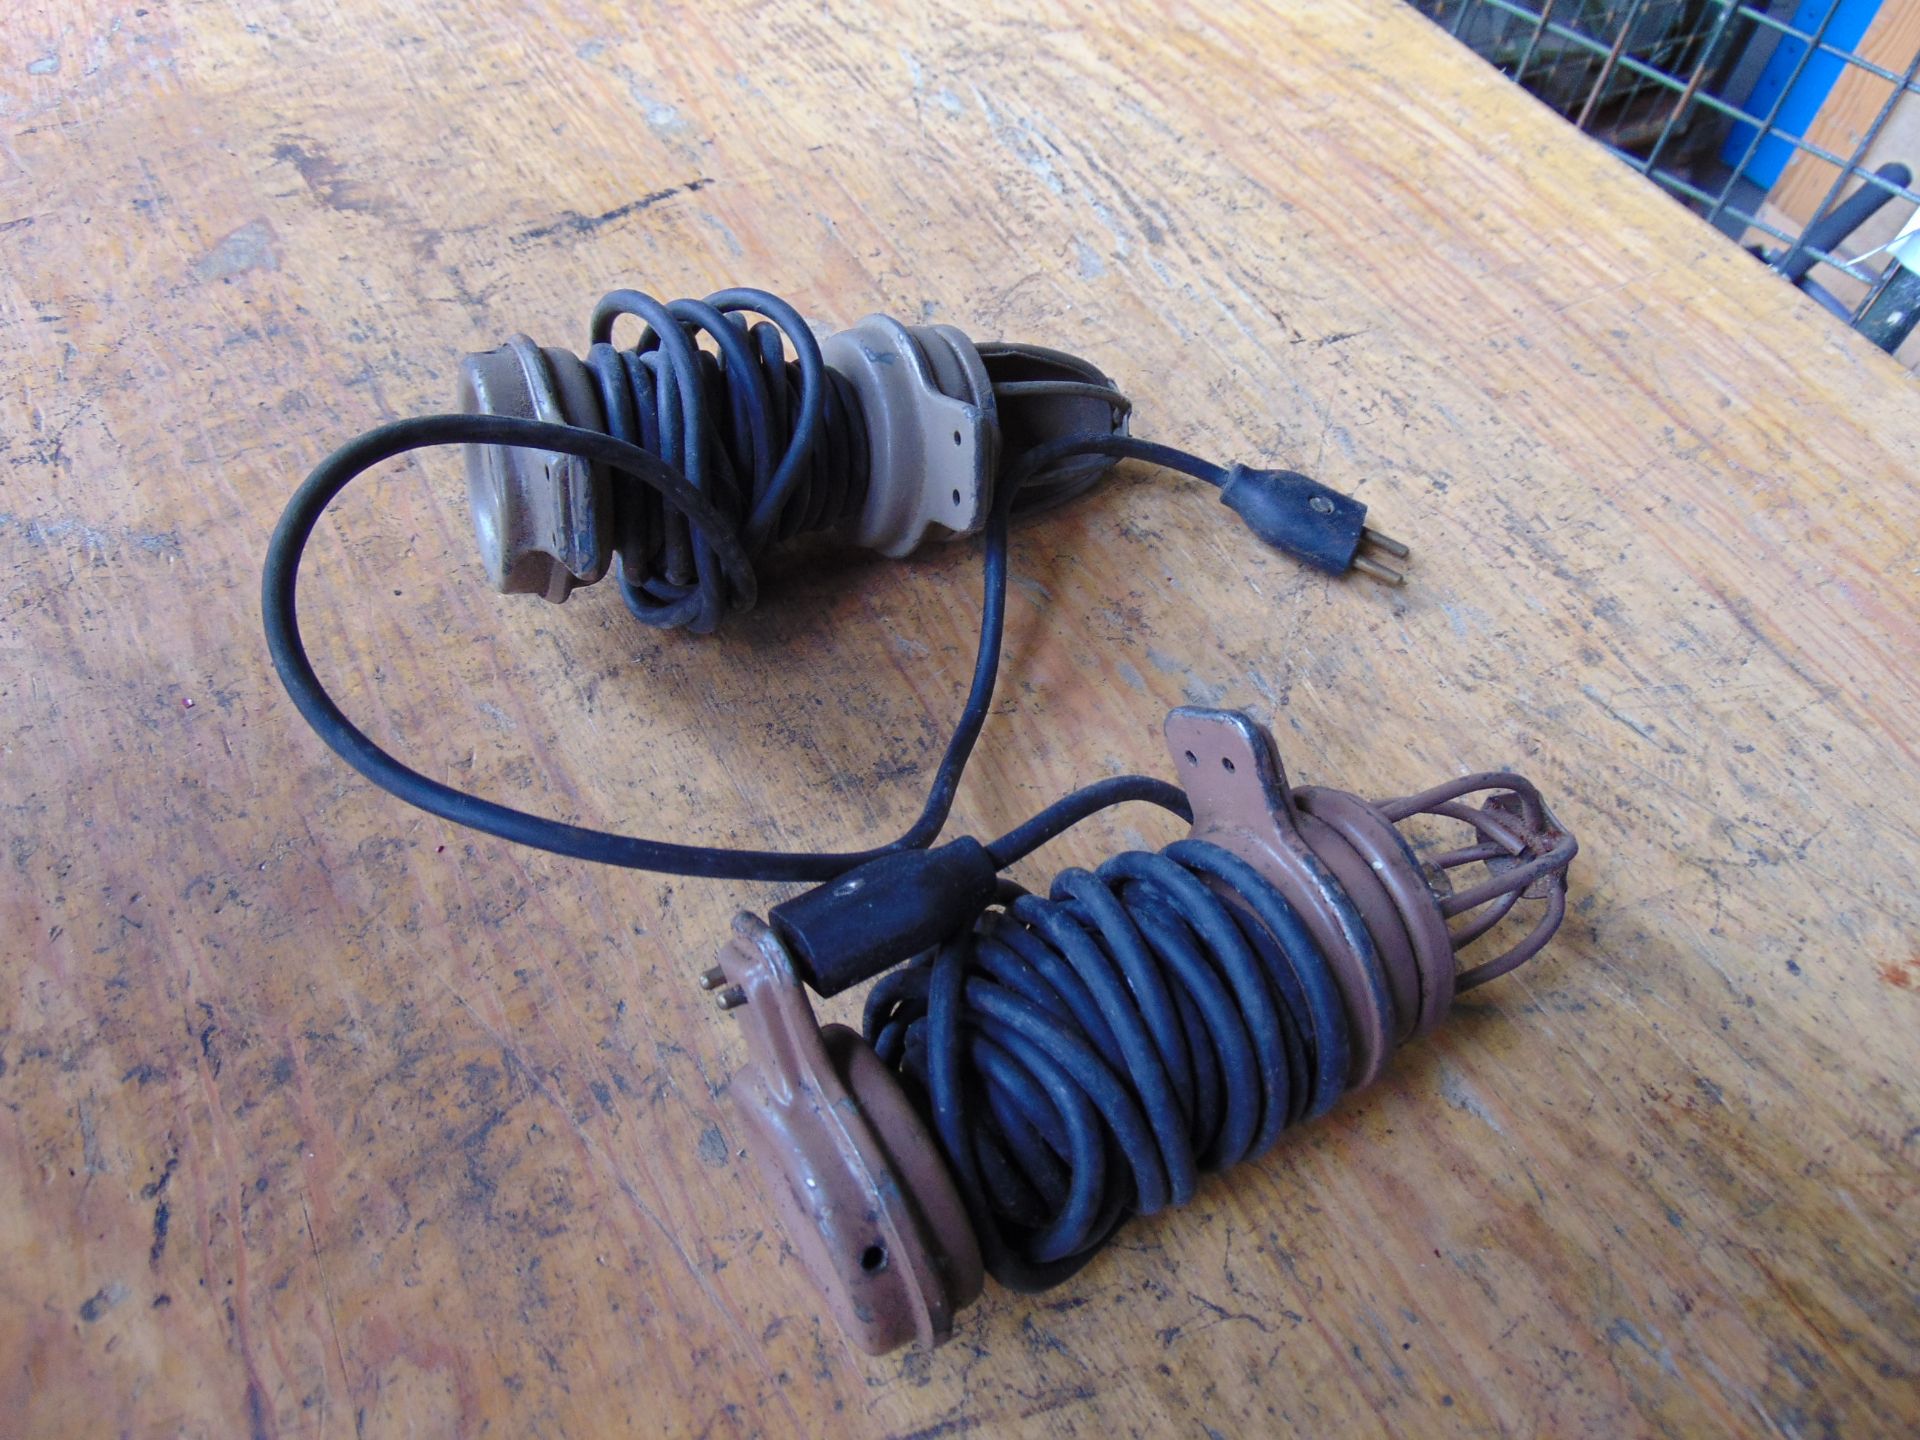 2 x Land Rover Series Inspection Lamps c/w Lead and Plug - Image 3 of 6